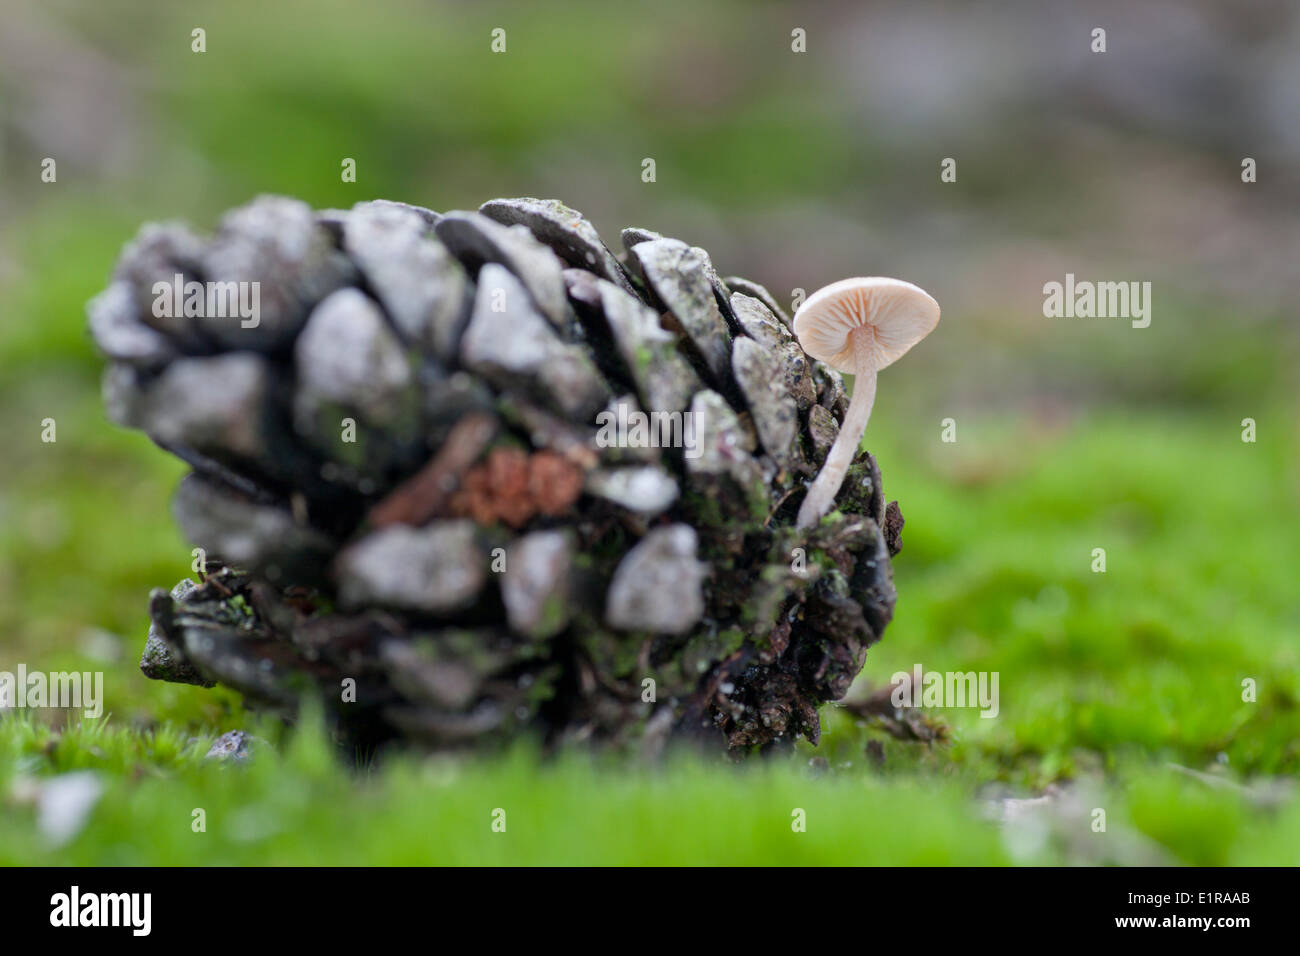 Conifercone Cap grows on coniferous cones as the name indicates. Stock Photo